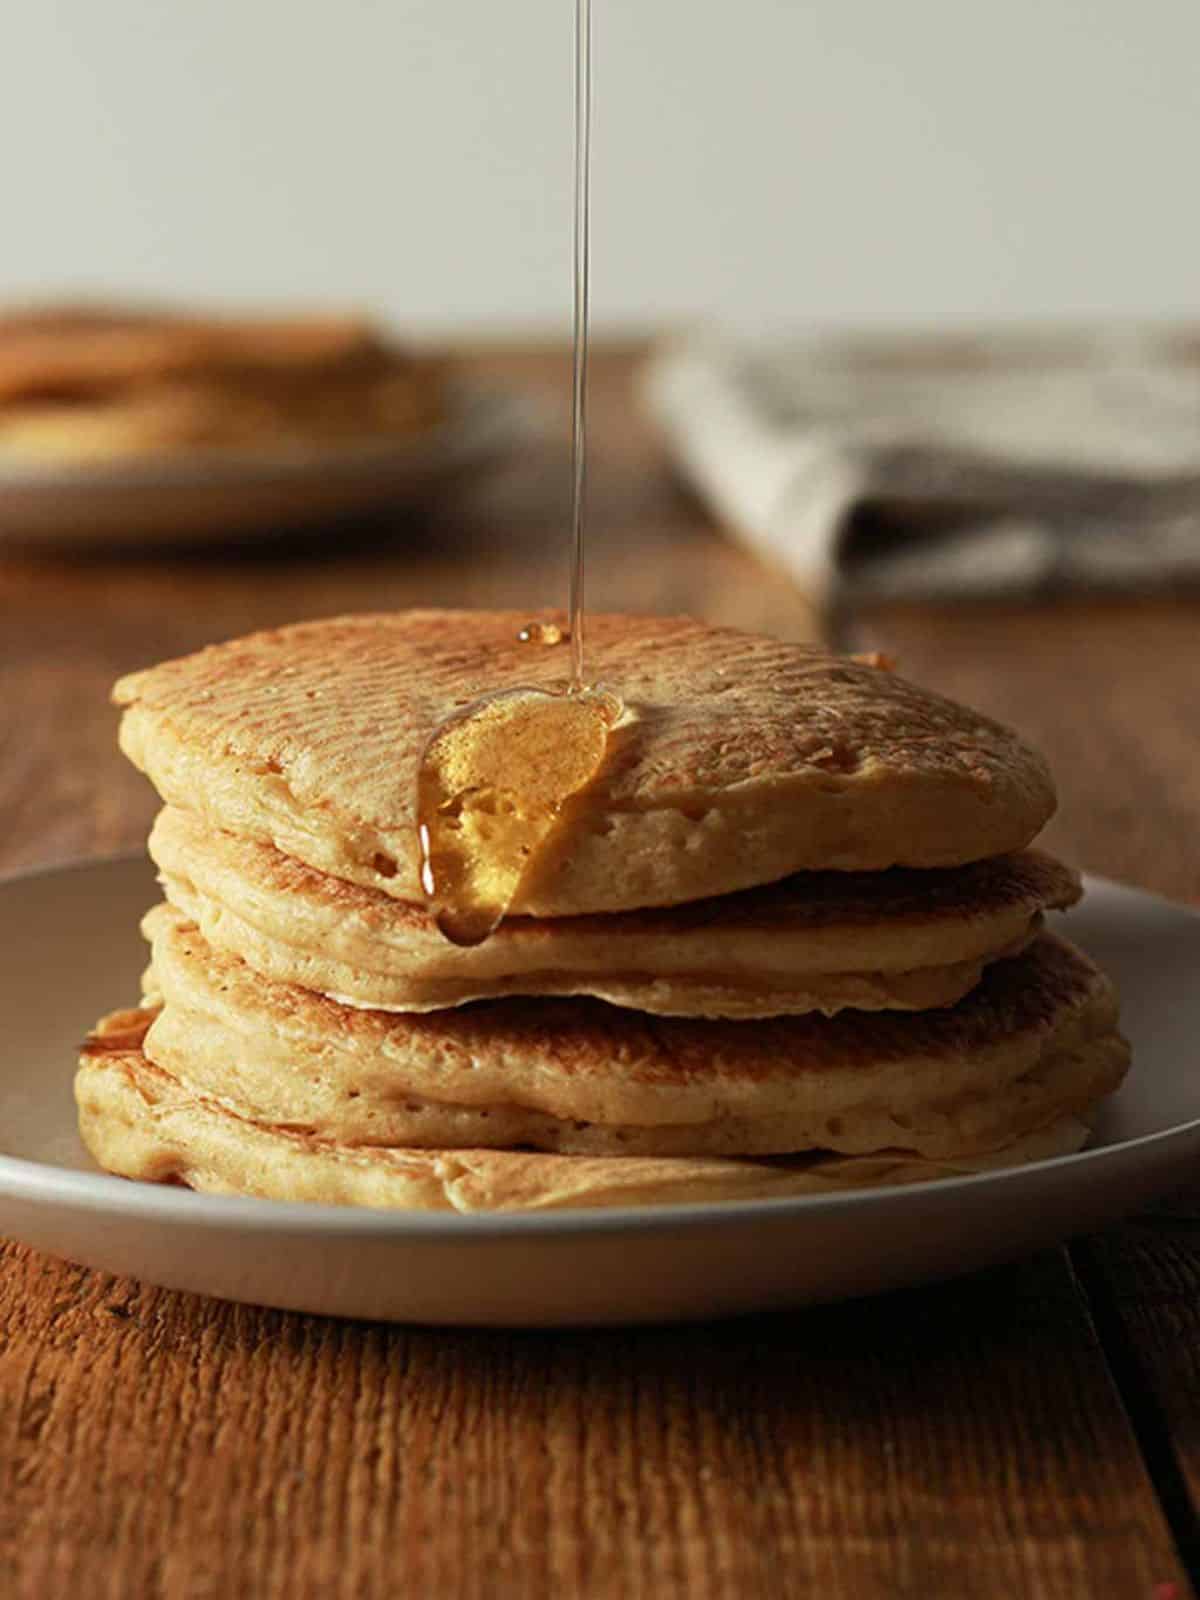 Fluffy golden vegan buttermilk pancakes stacked on a plate, drizzled with syrup.